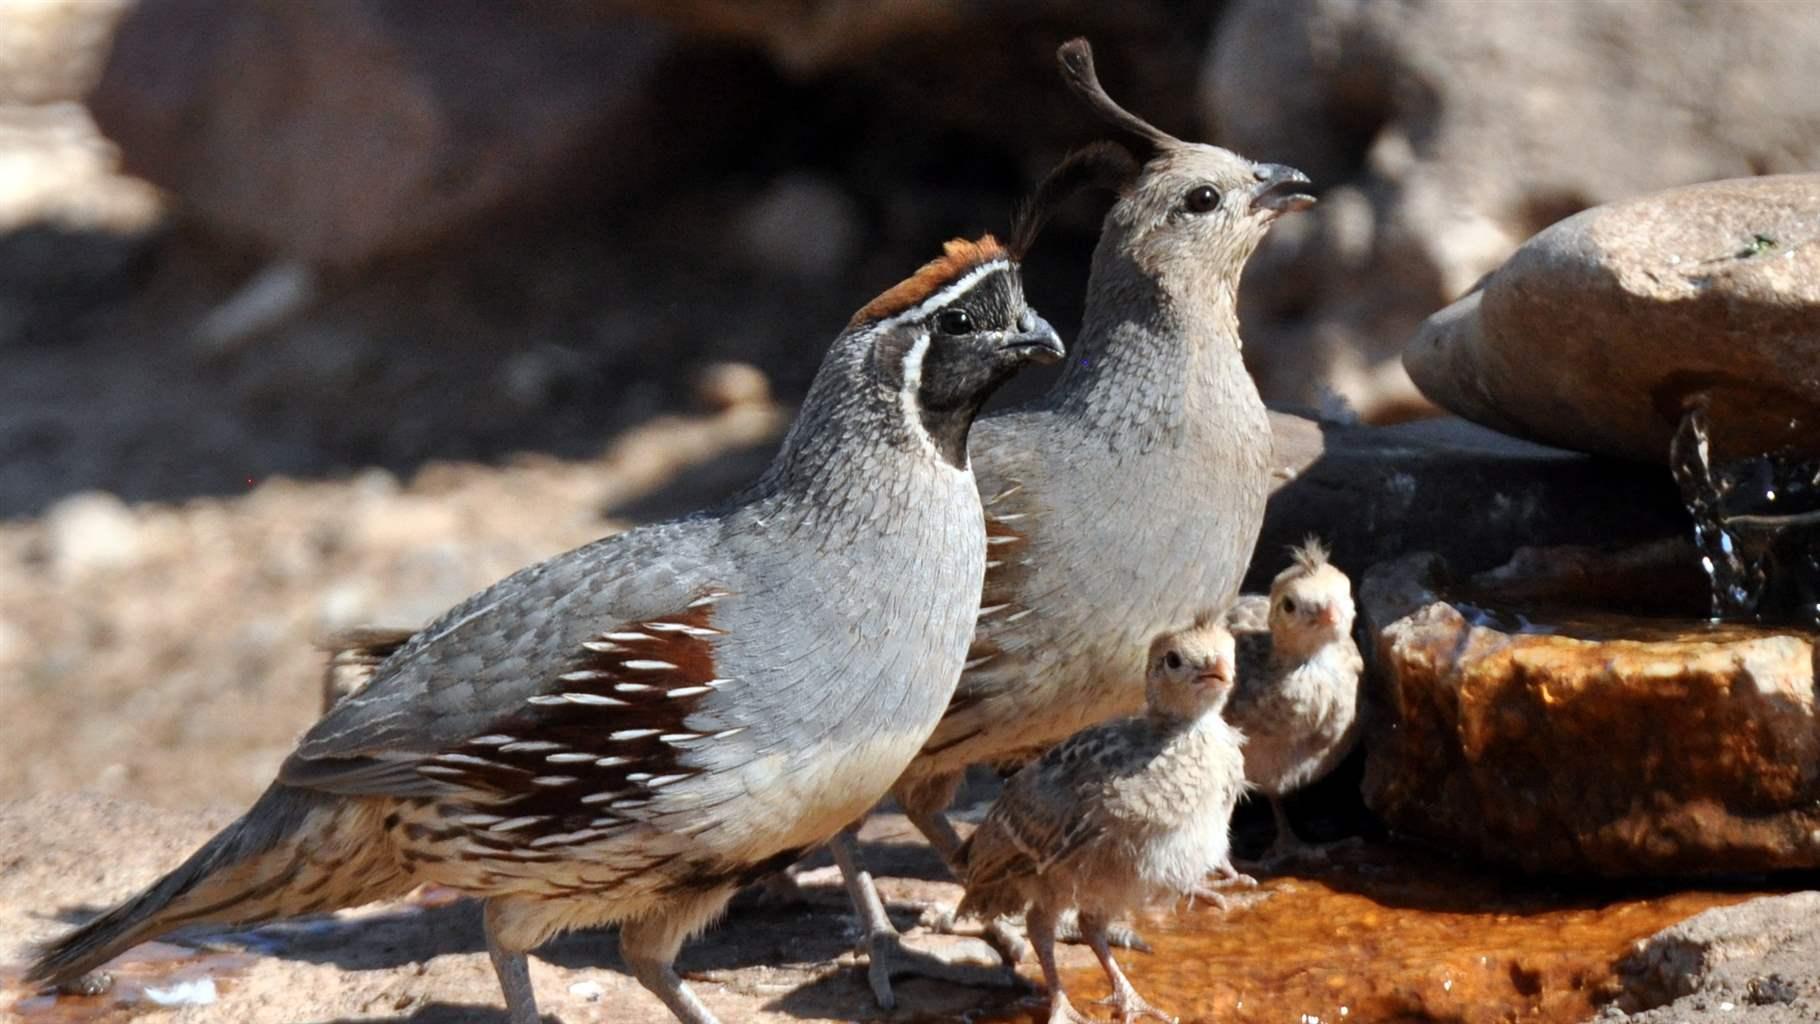 The Gambel’s quail, identifiable by its distinctive top knot, is one of 62 bird species found within Castner Range, a mountainous area outside El Paso, Texas.